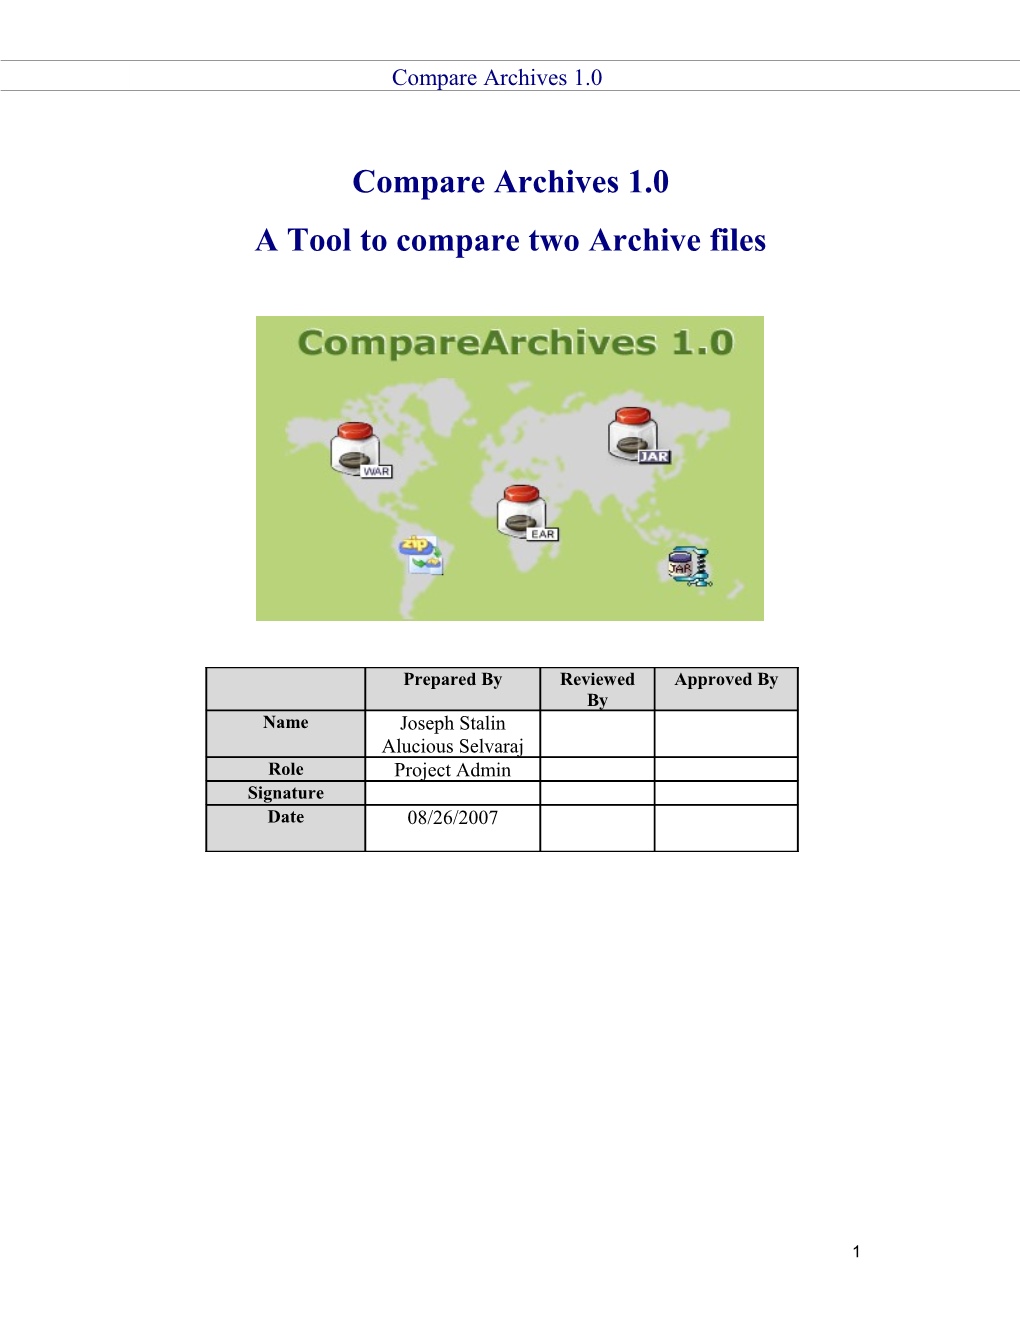 A Tool to Comparetwo Archive Files